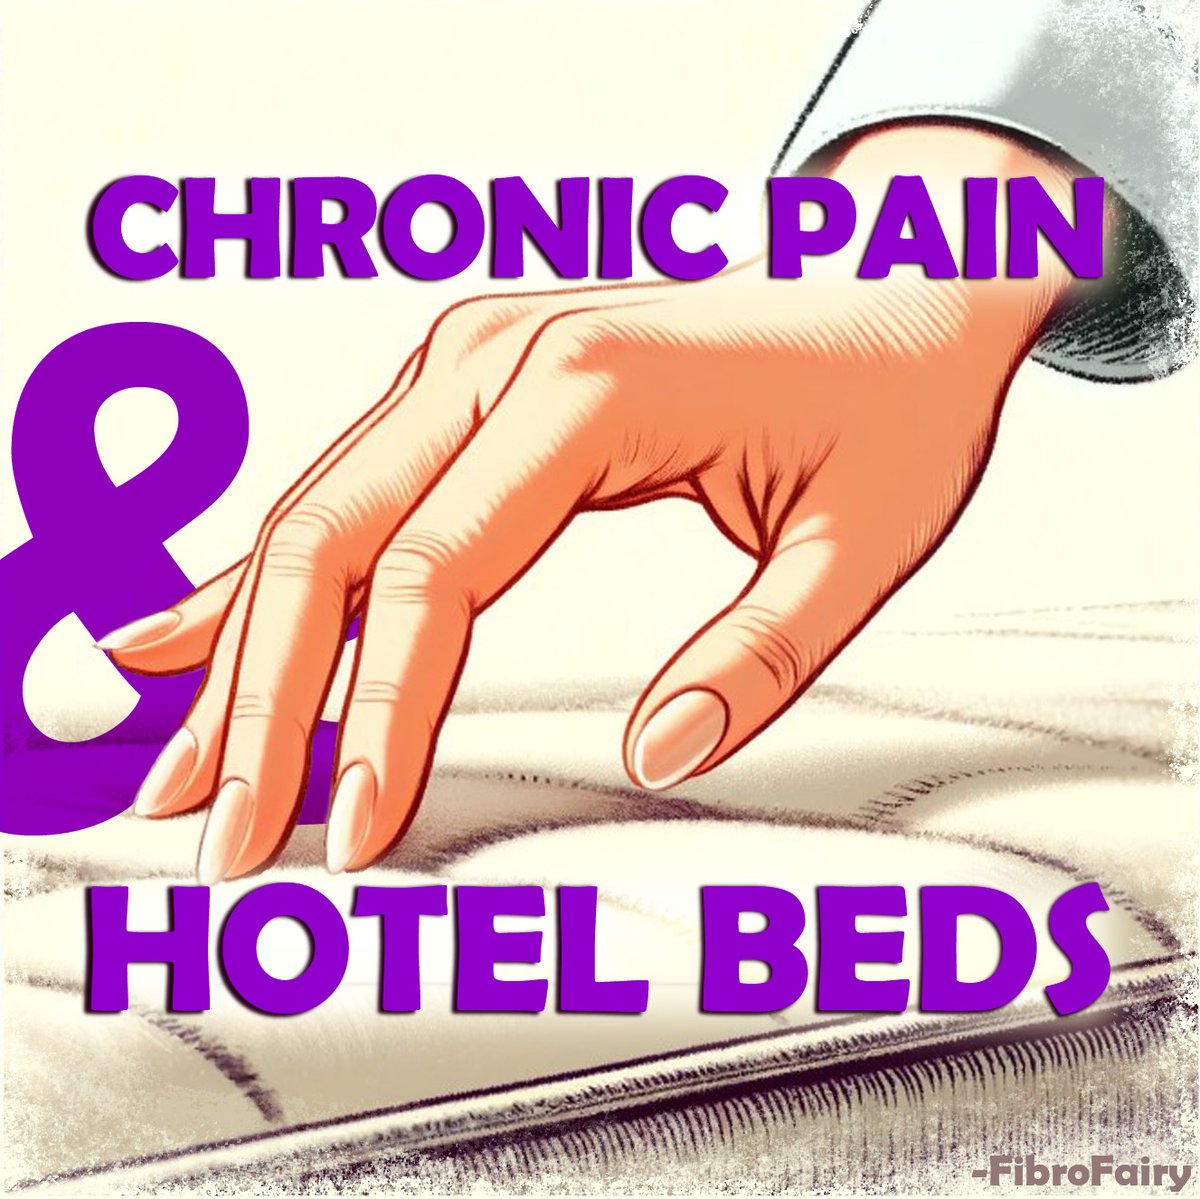 Why are #hotel beds so hard?
My theory:They last longer=It’s cheaper.
But these days—everything is customizable, so why can't we choose mattress softness?
I’d pay extra for a softer bed to ease my #Fibromyalgia #pain.
for #ChronicPain, this should be as standard as ramps are!🦽💪